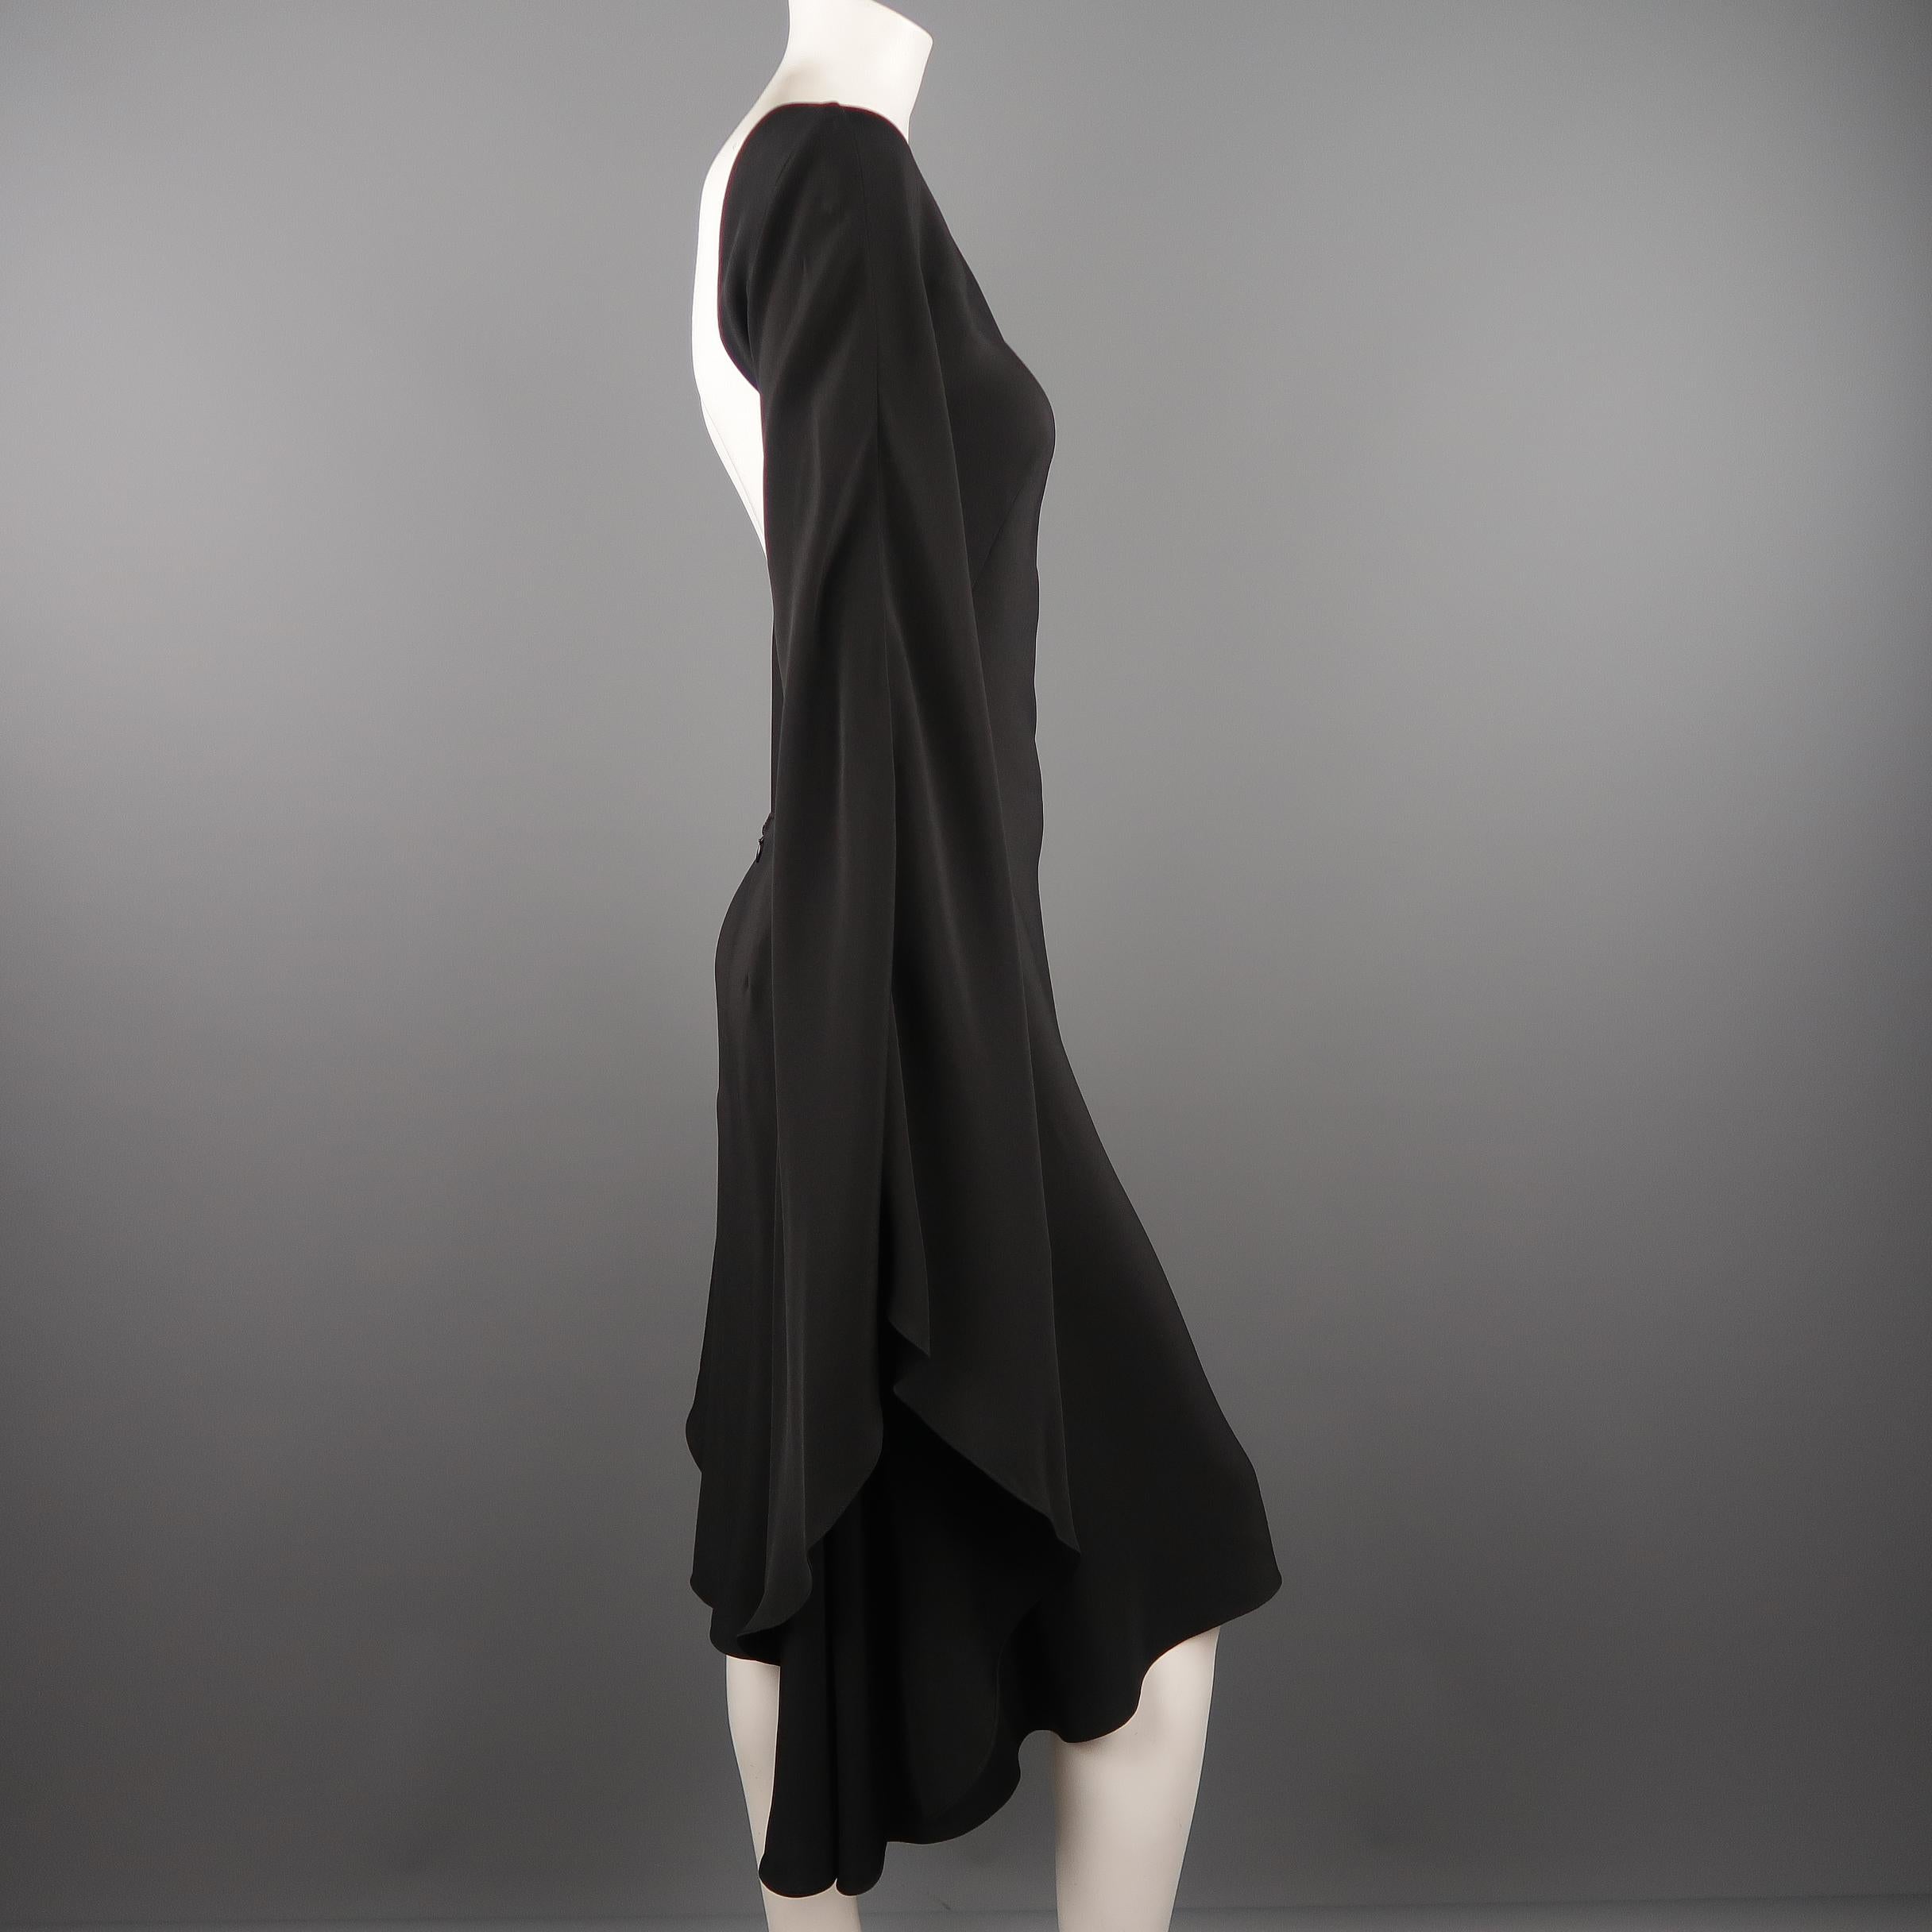 Iconic TOM FORD - Spring 2013 Runway Size 4 Black Silk Open Back Cocktail Dress 3